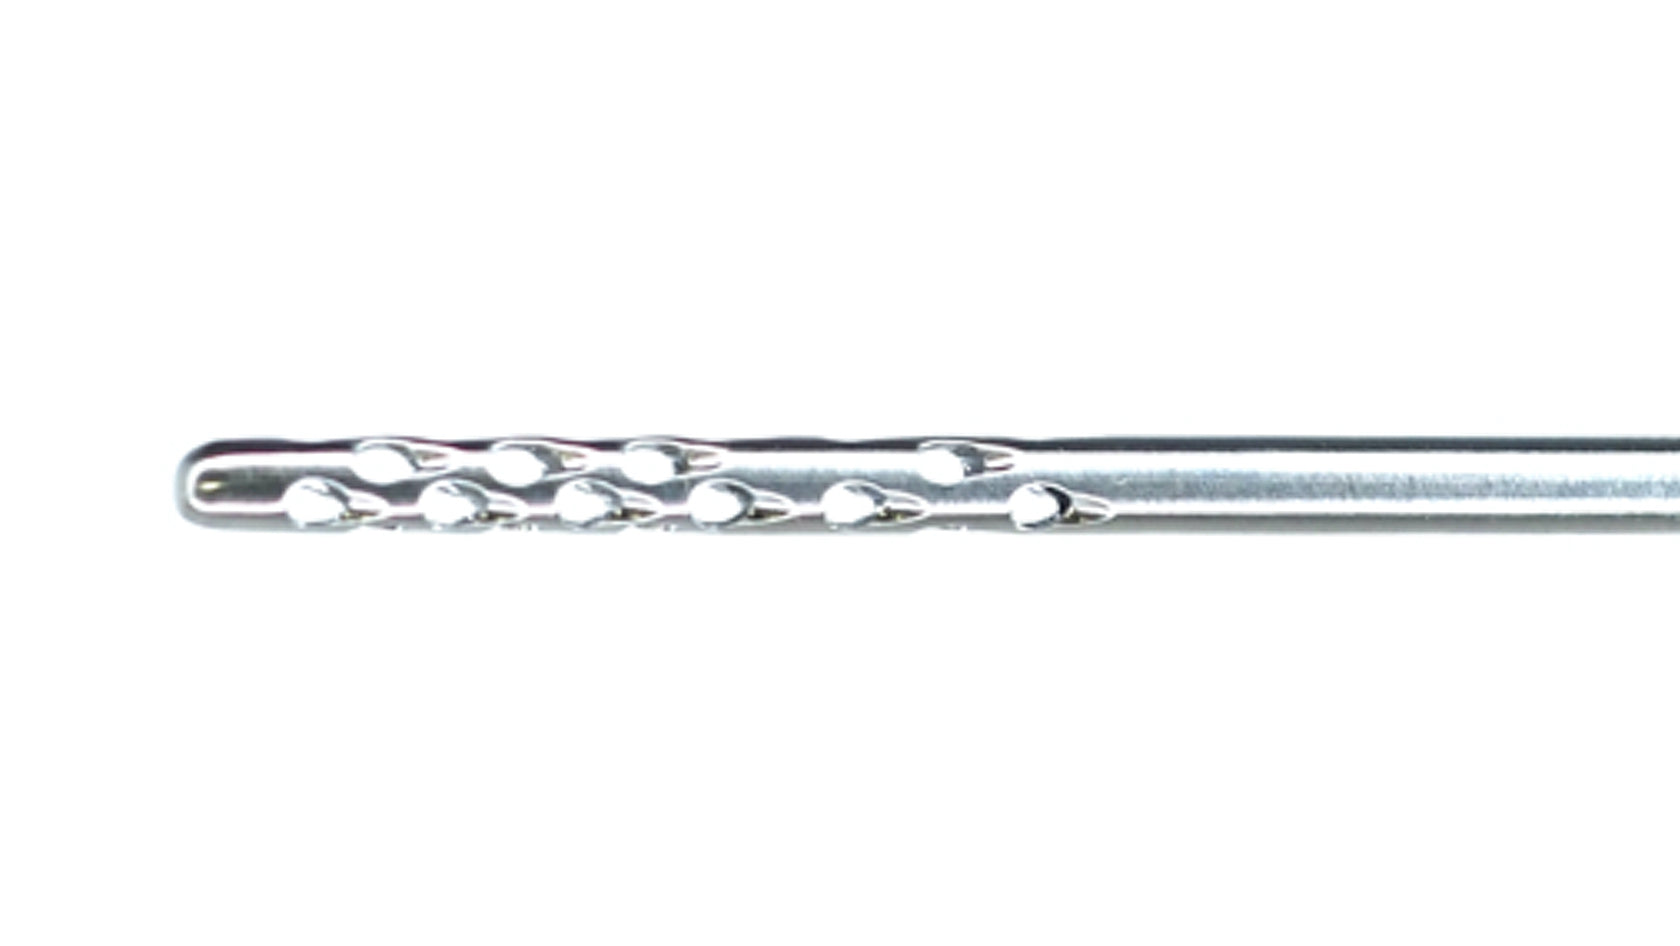 30 Hole Round Tip Single Use Liposuction Cannula by Precise Medical Supplies